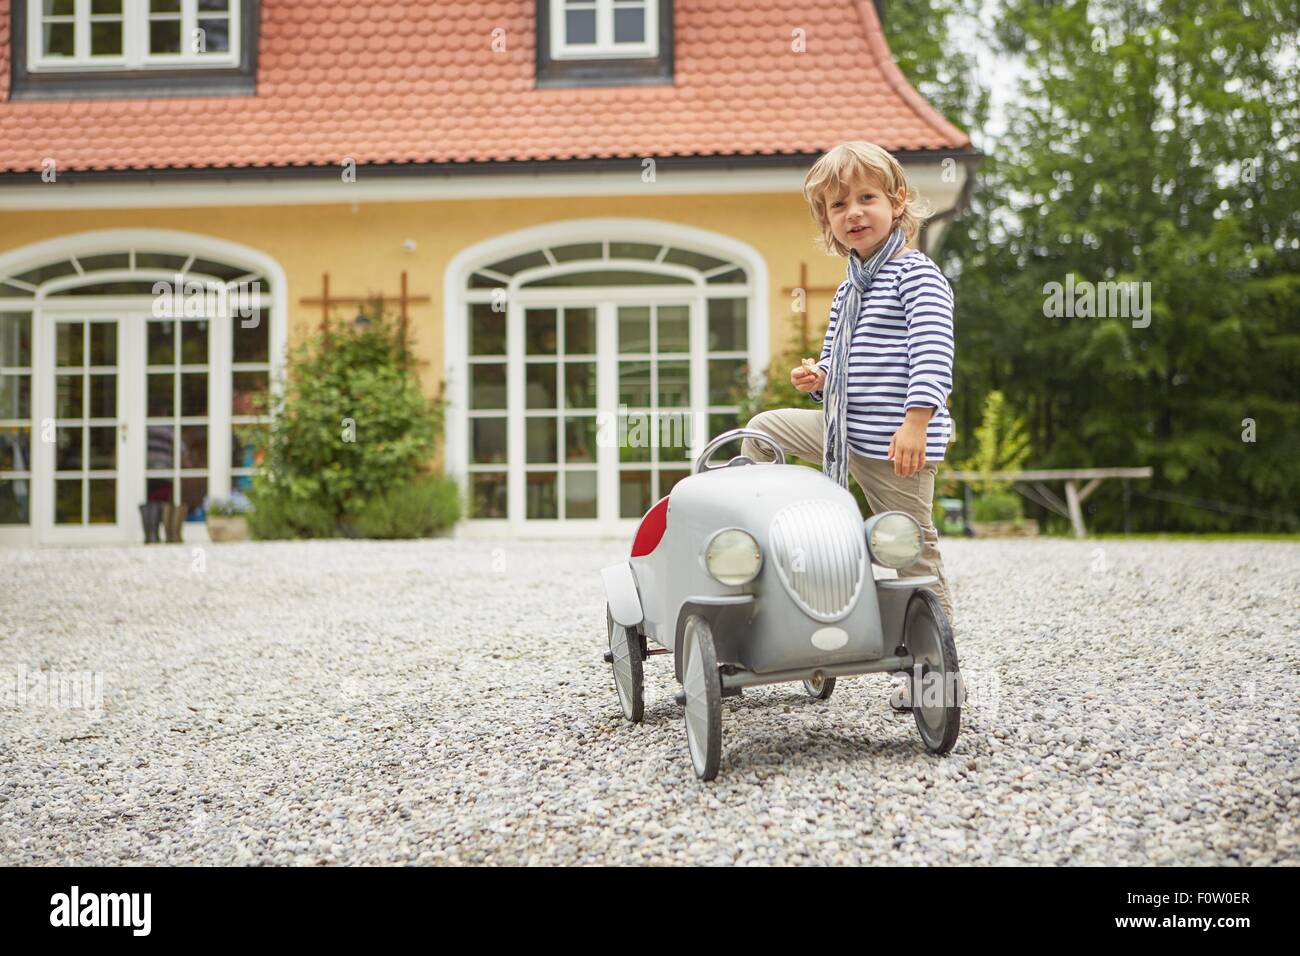 Boy playing with vintage toy car in front of house Stock Photo